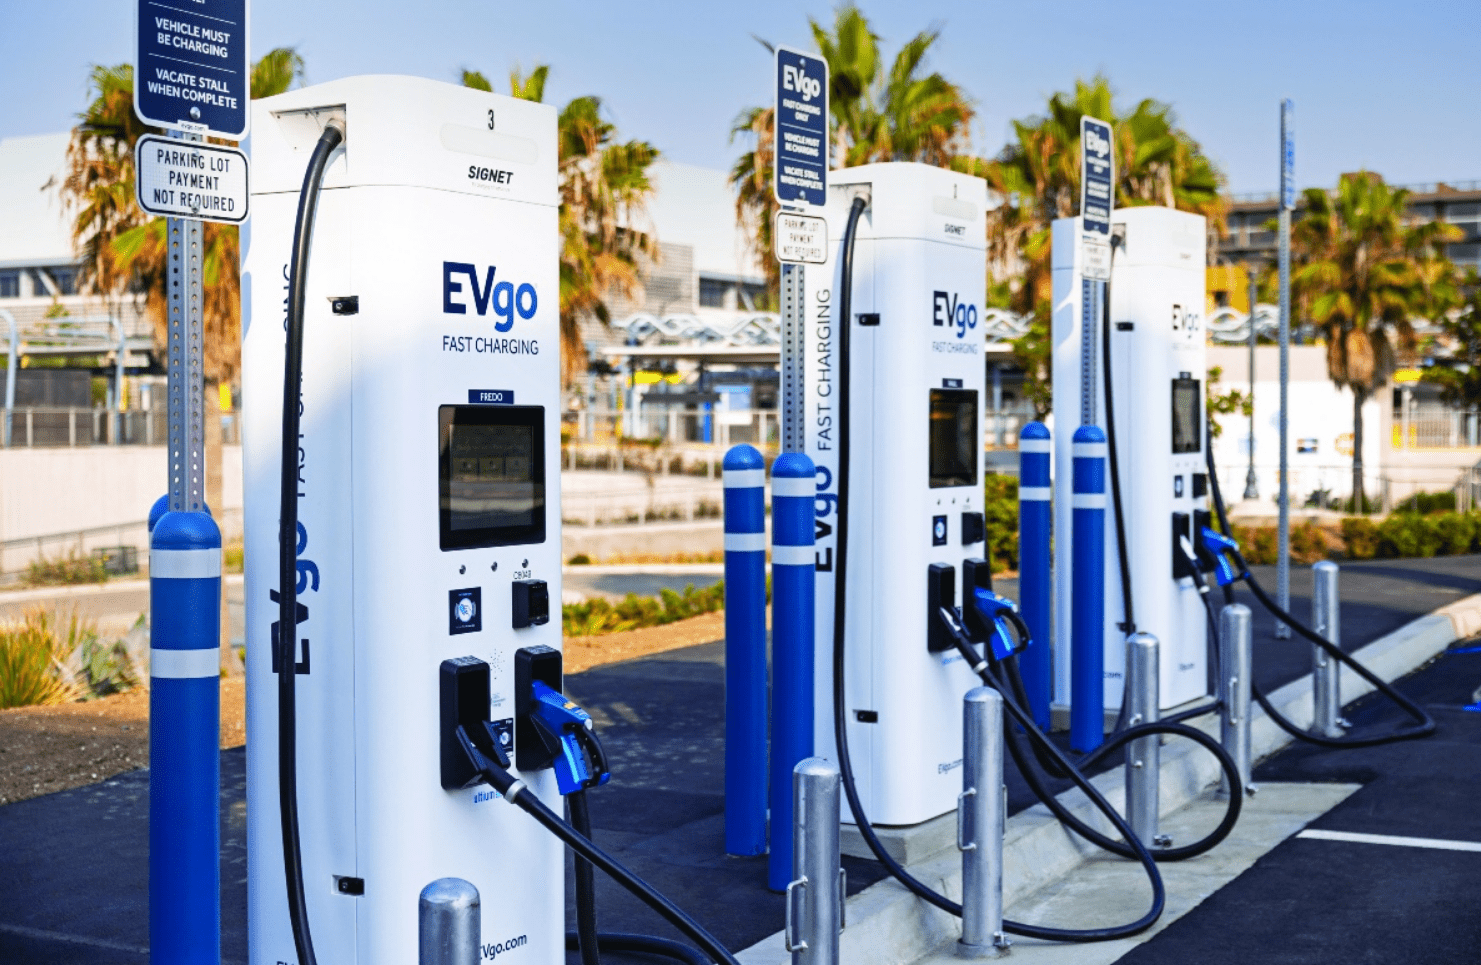 The-Top-5-Fast-Charging-Stations-for-EVs-in-2023-Ev-go-stations